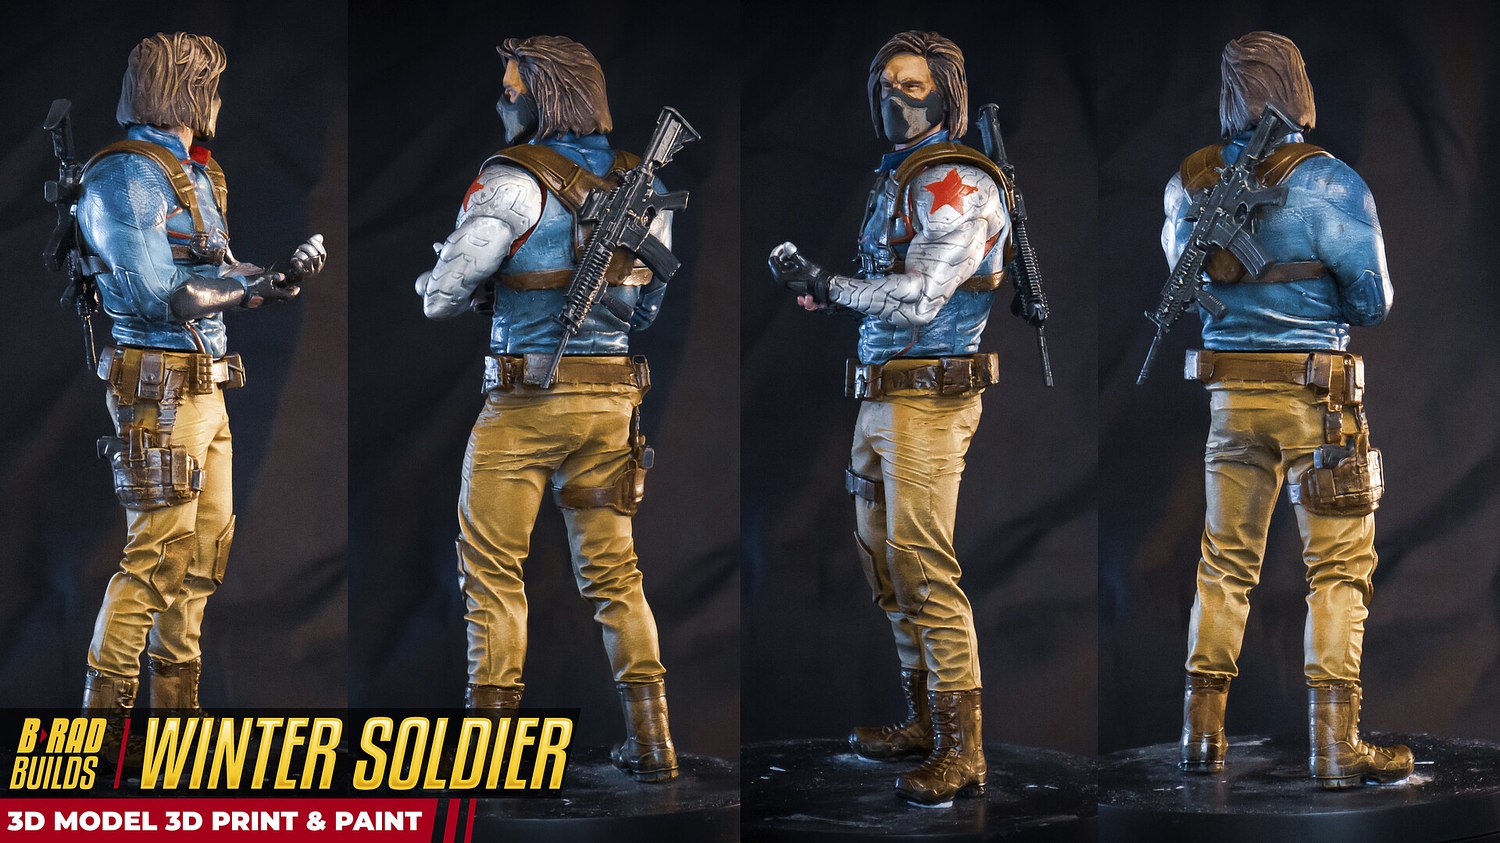 Winter Soldier From Marvel